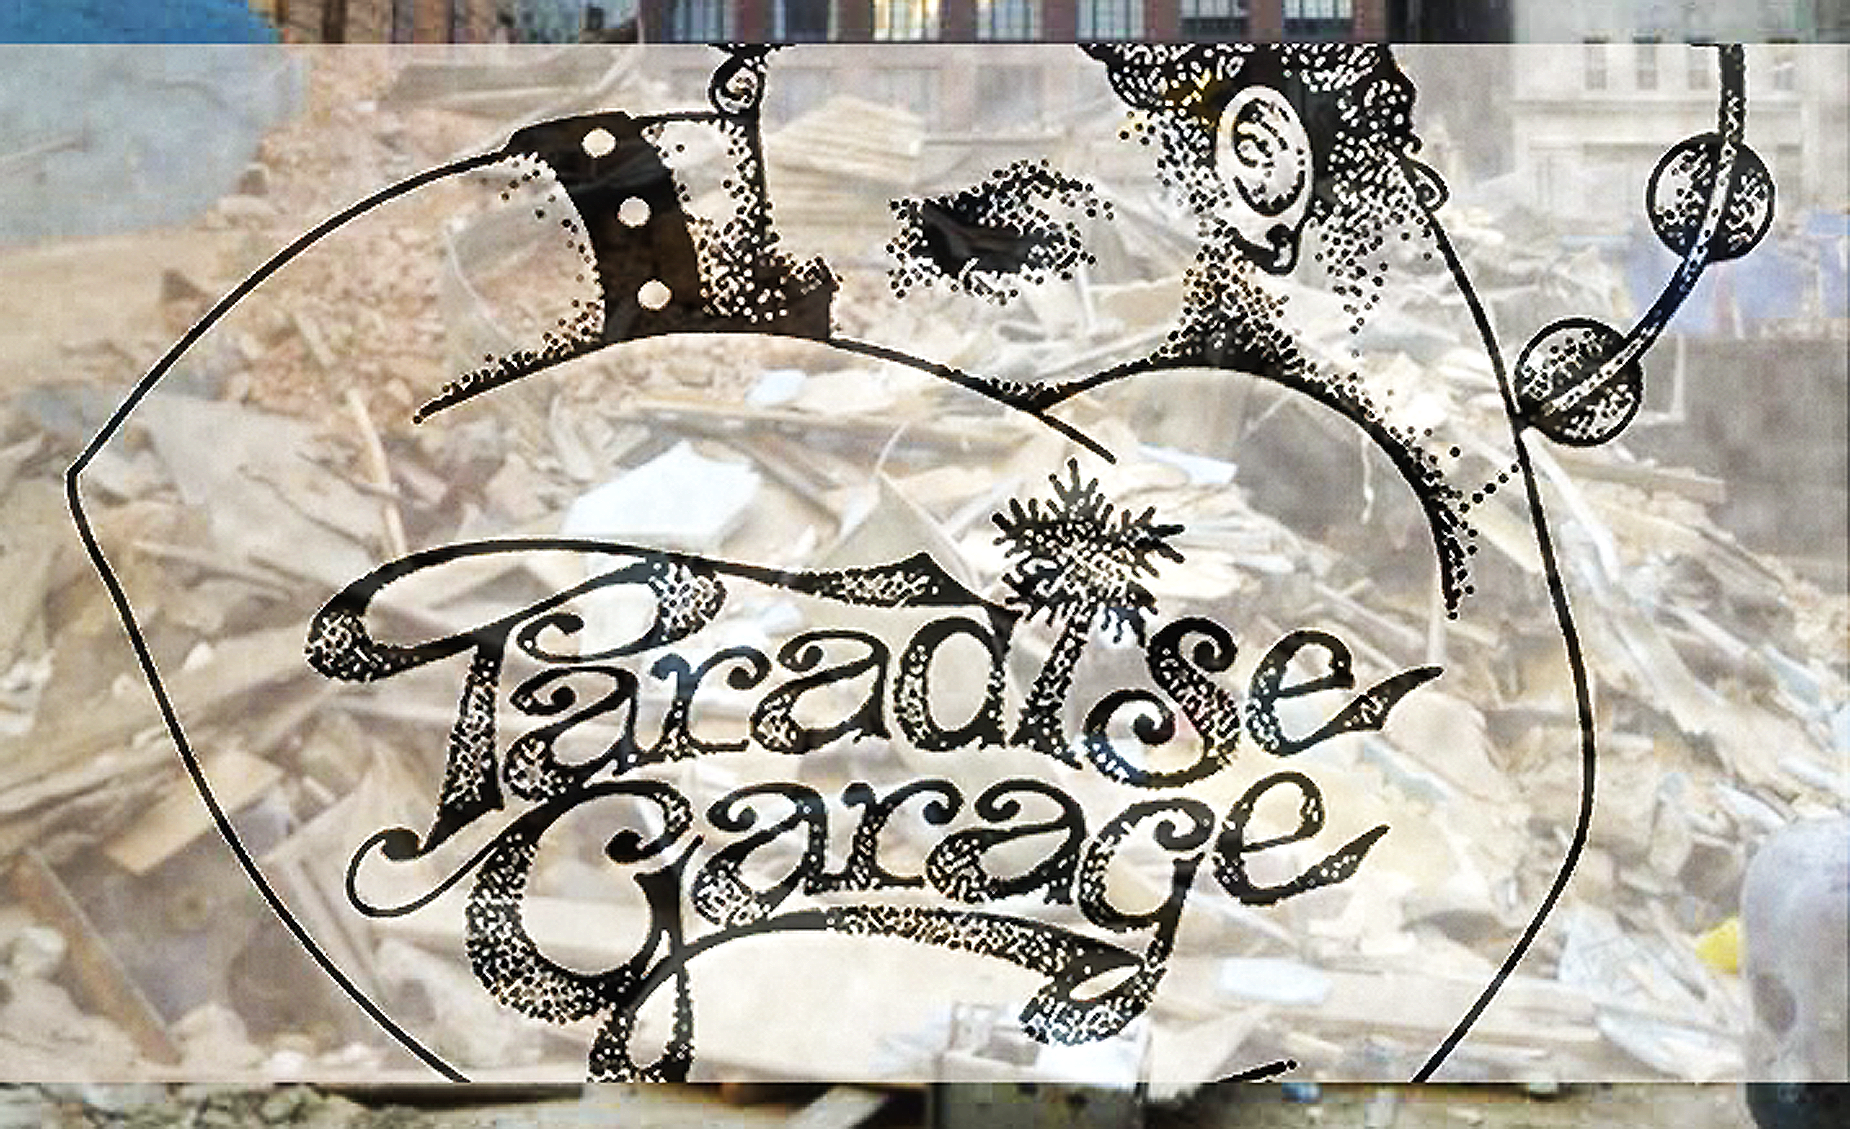 Paradise Garage Lost.png